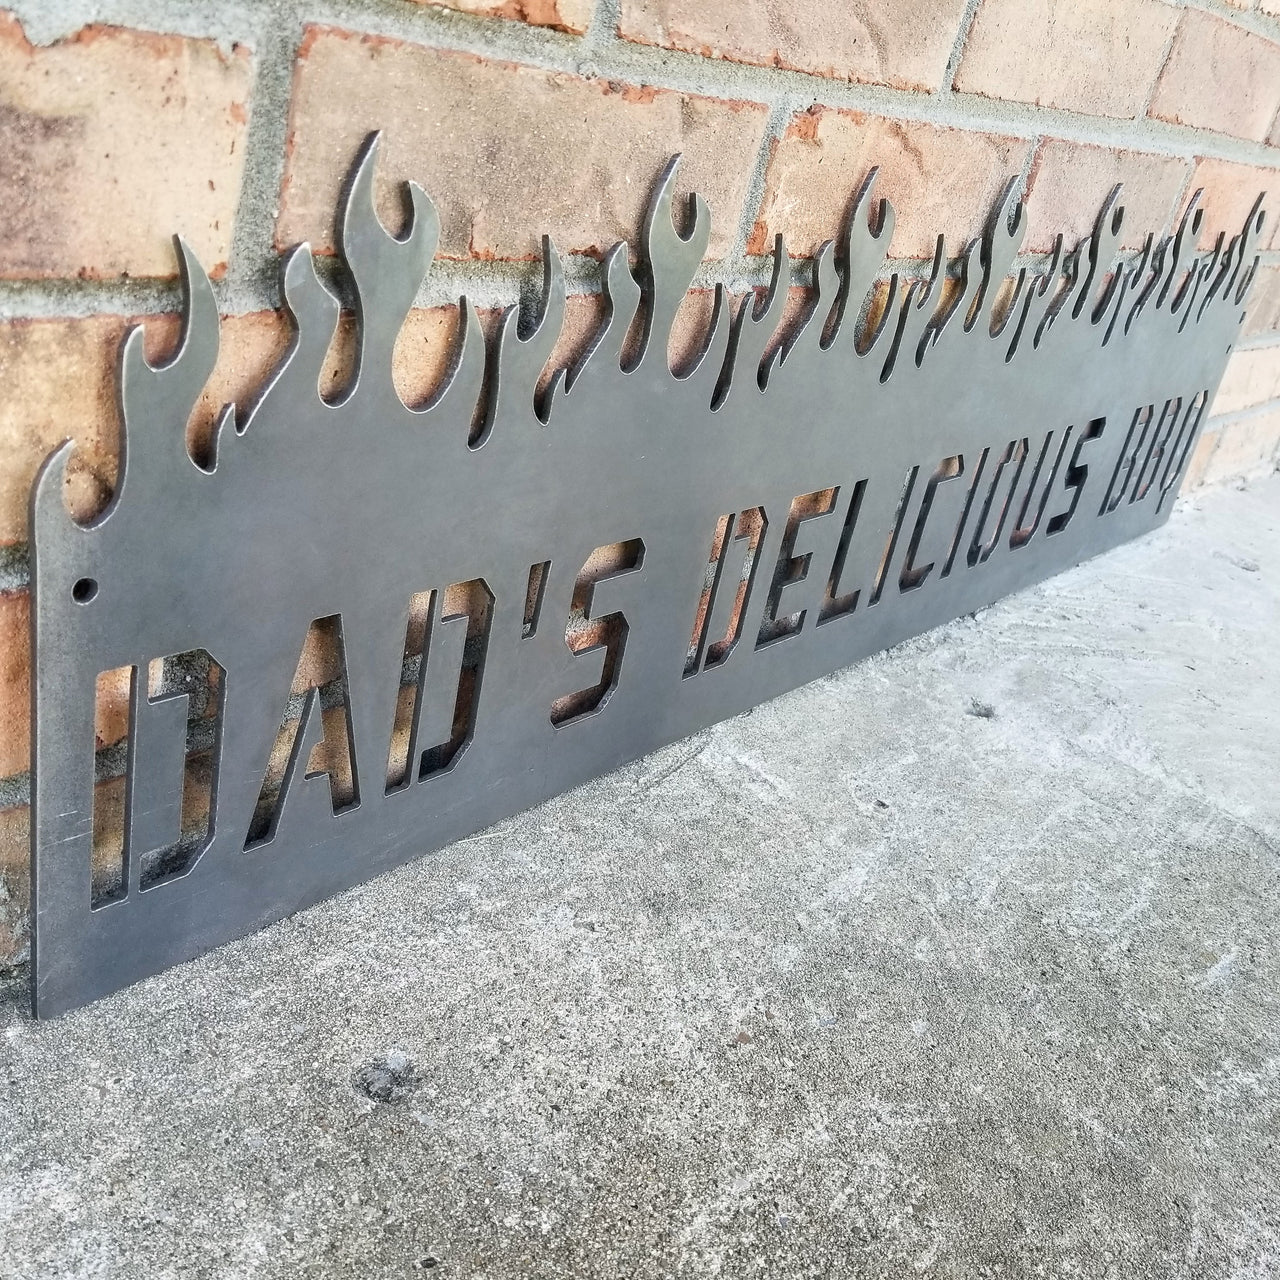 Personalized Metal Dad BBQ Sign - Barbeque, Barbecue, Smoker Decor - Green Egg, Traeger